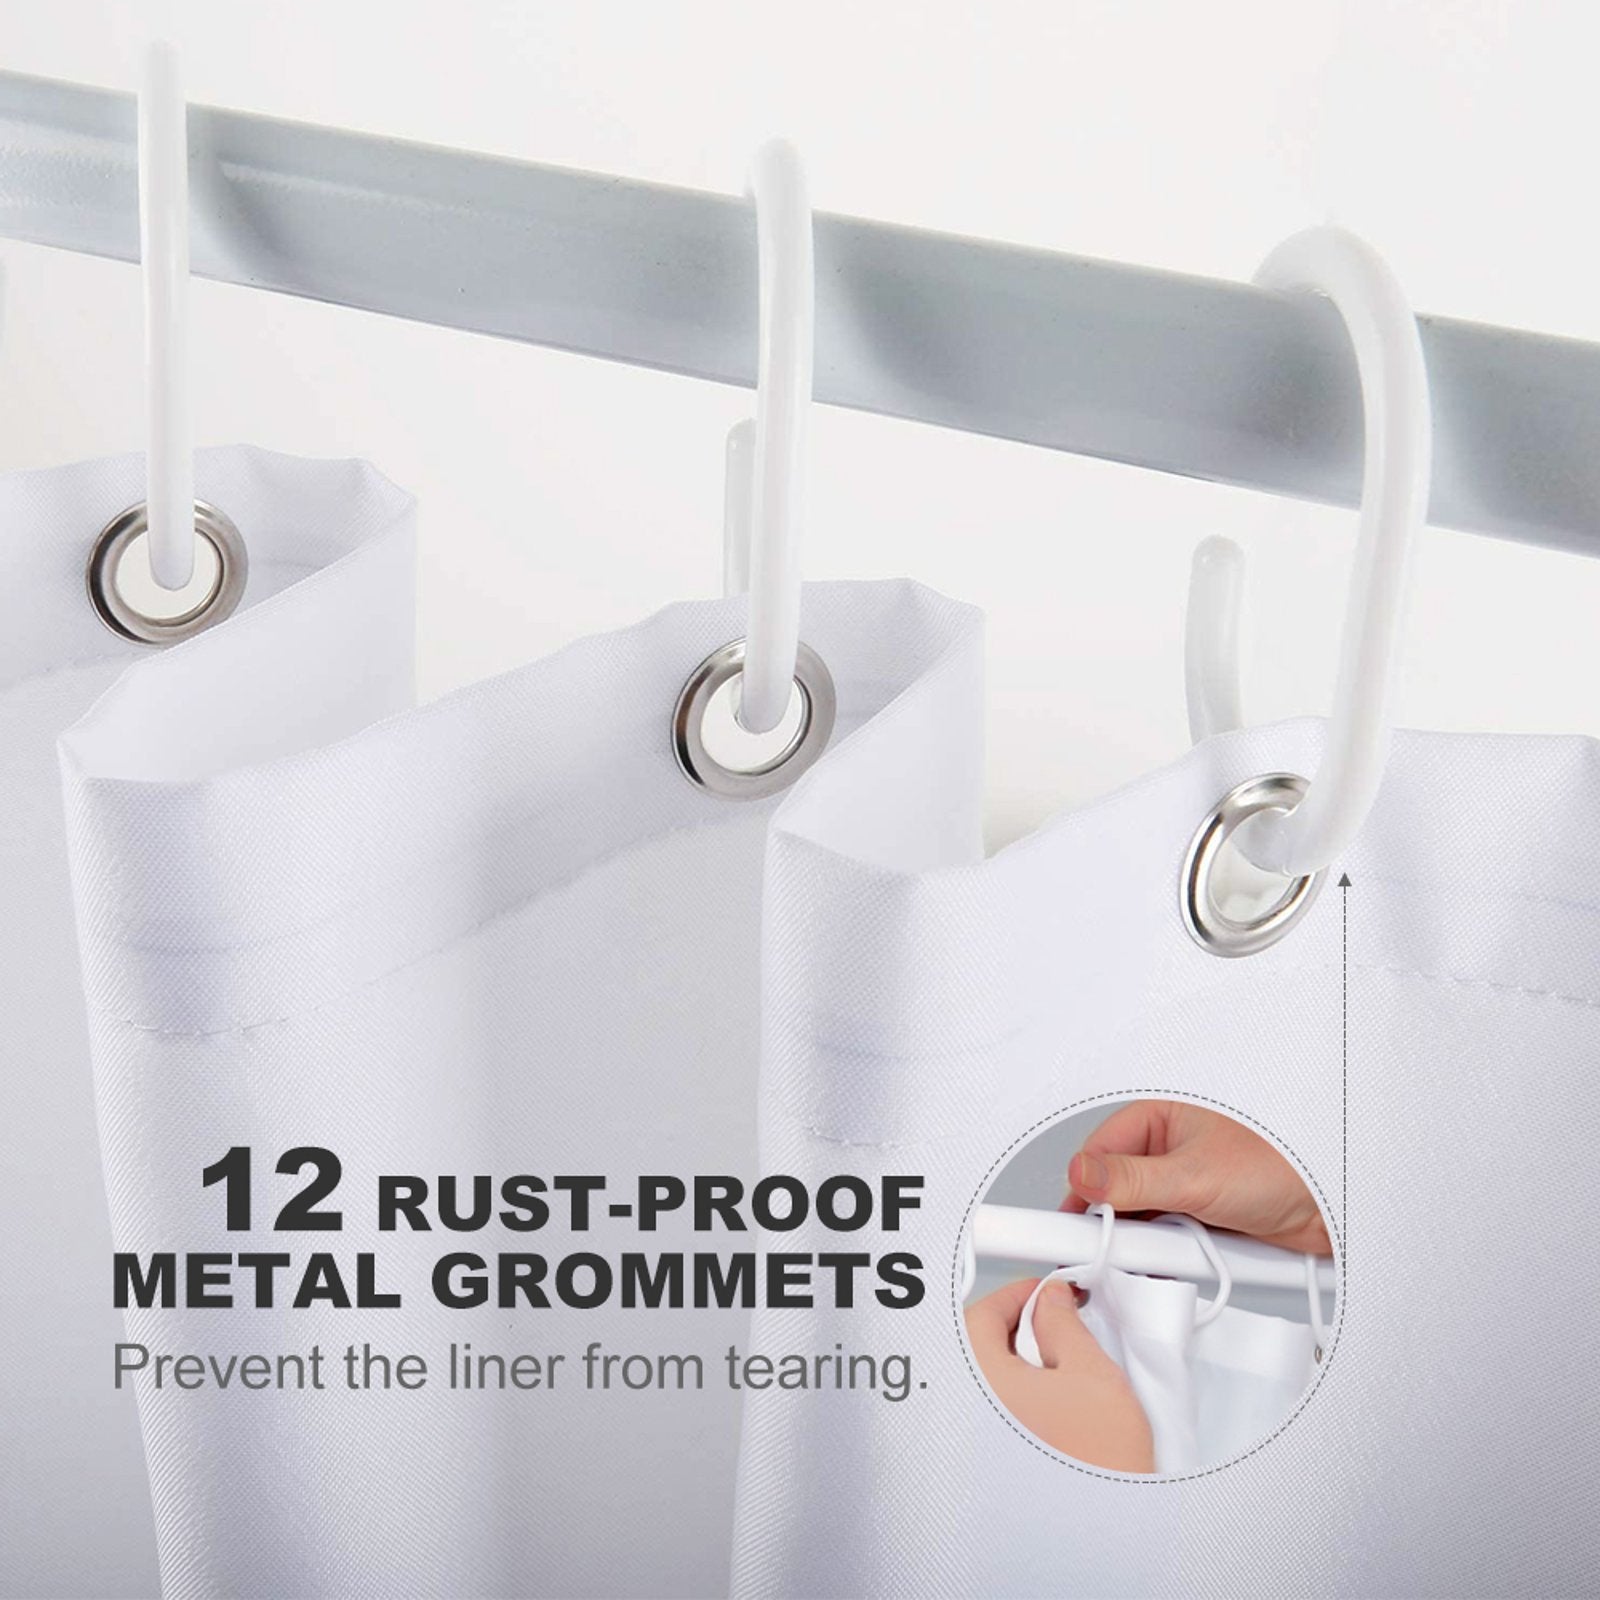 Close-up of a white shower curtain with metal grommets hanging on a rod. Text overlay reads: "12 Rust-Proof Metal Grommets. Prevent the liner from tearing." Perfect for adding charm to your bathroom decor, especially with our Cute Baby Happy Elephant and Flowers Shower Curtain-Cottoncat.